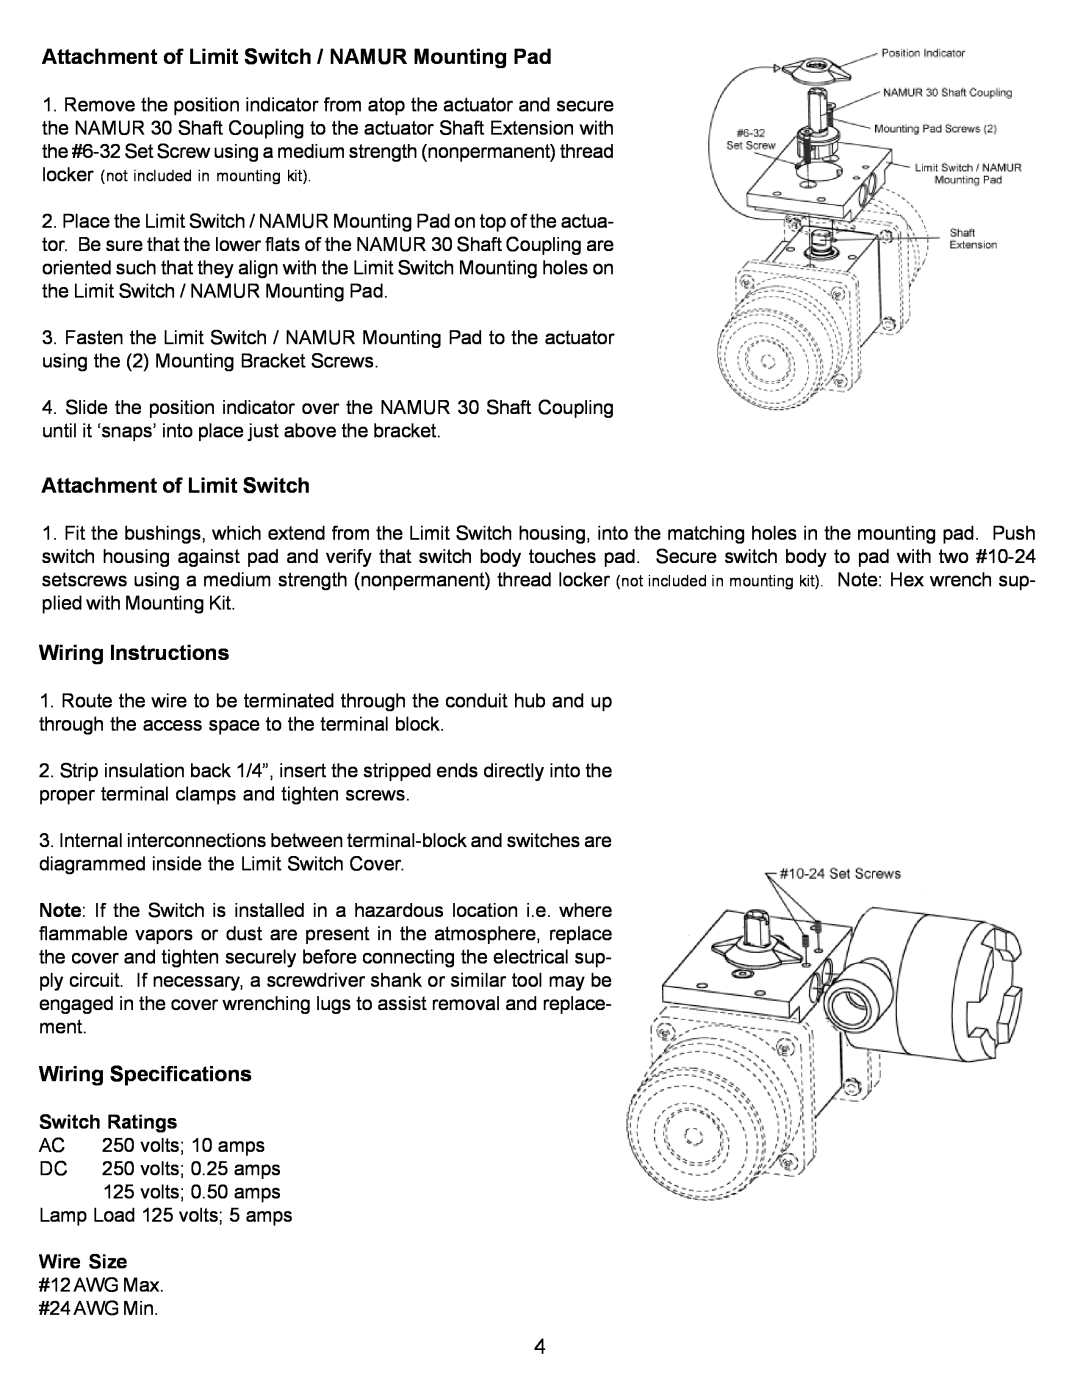 Omega Engineering BVLS Series Attachment of Limit Switch / NAMUR Mounting Pad, Wiring Instructions, Wiring Specifications 